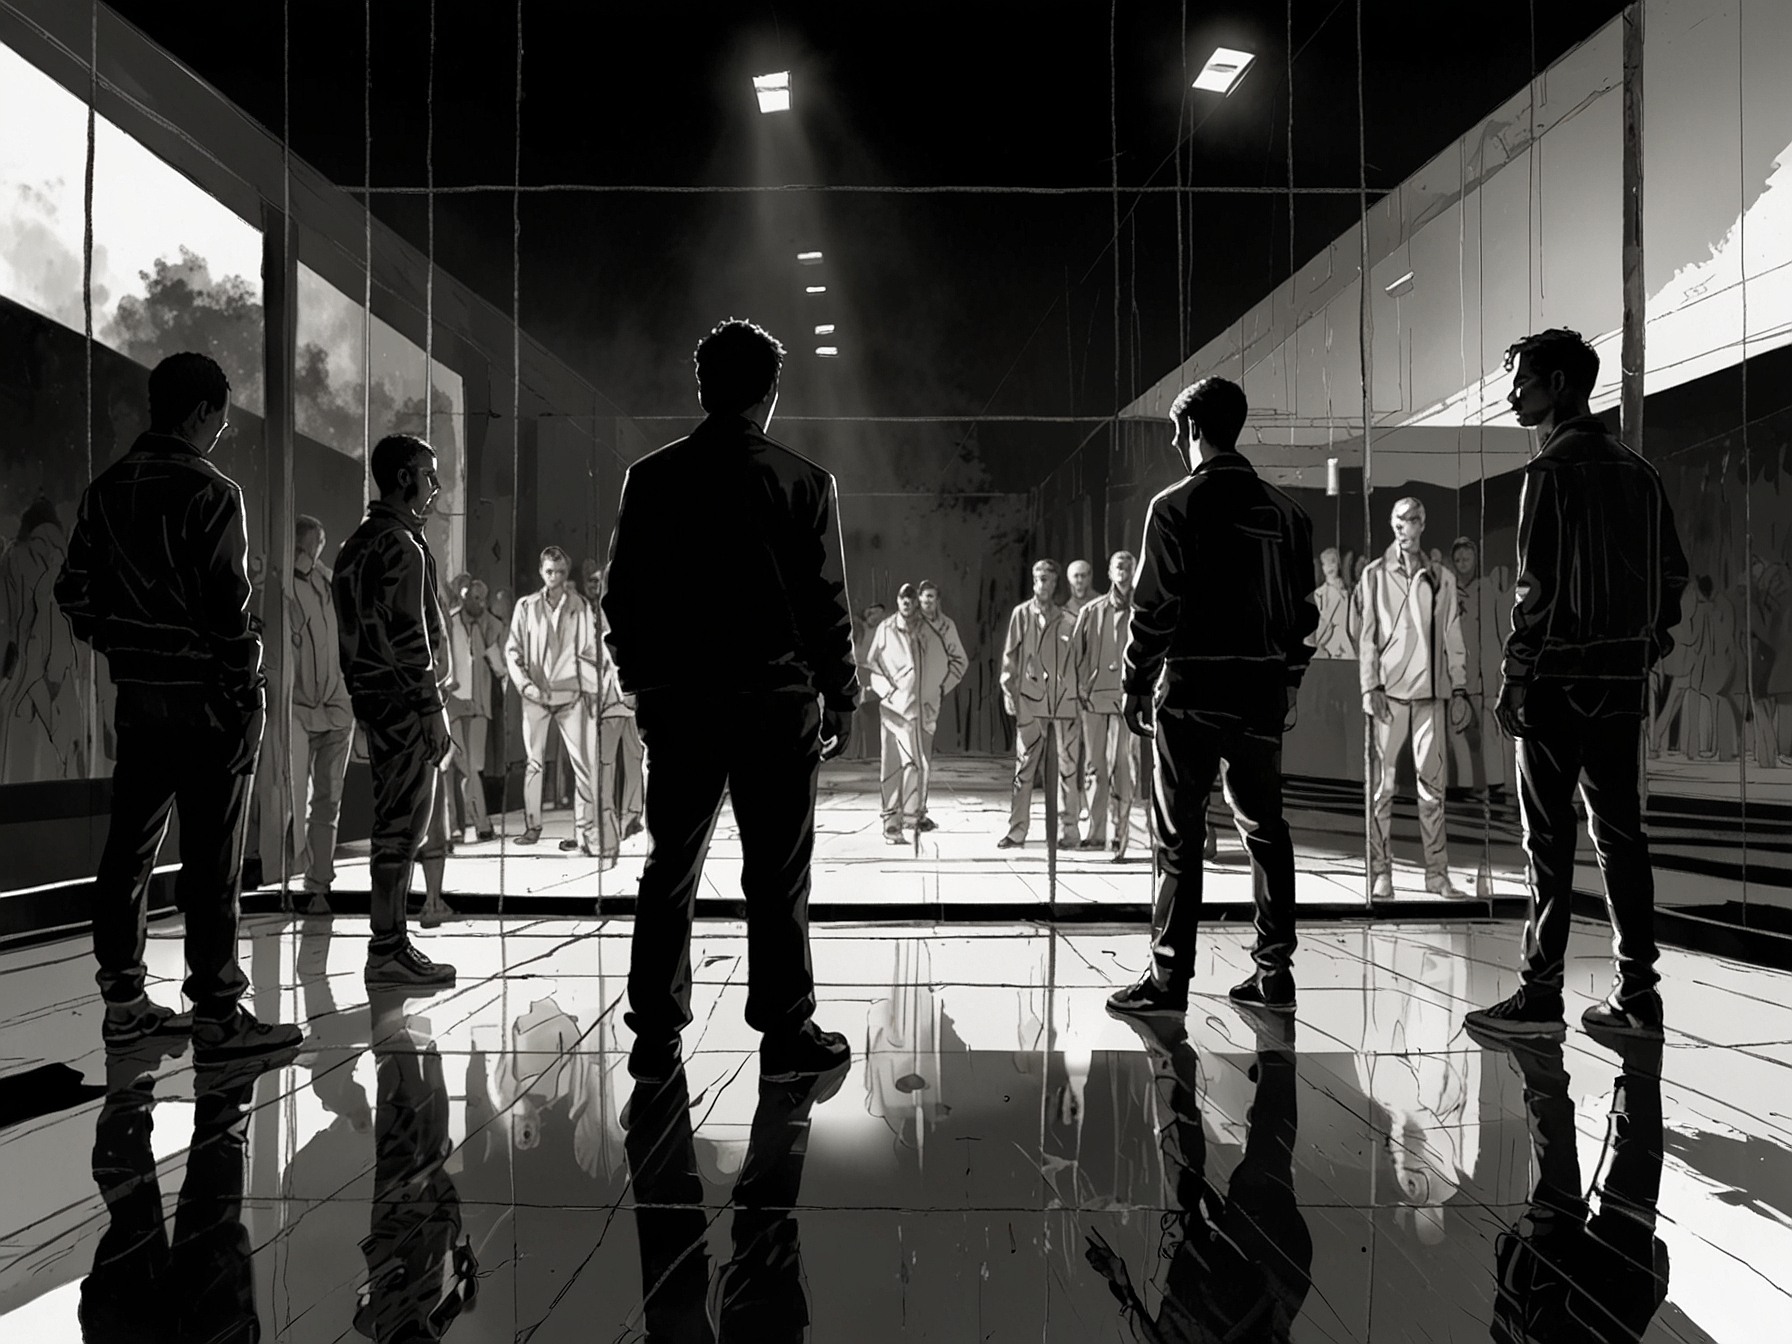 A scene from the music video showing mirrored reflections and shadowy figures, visually depicting the song's themes of insecurity and internal struggle.